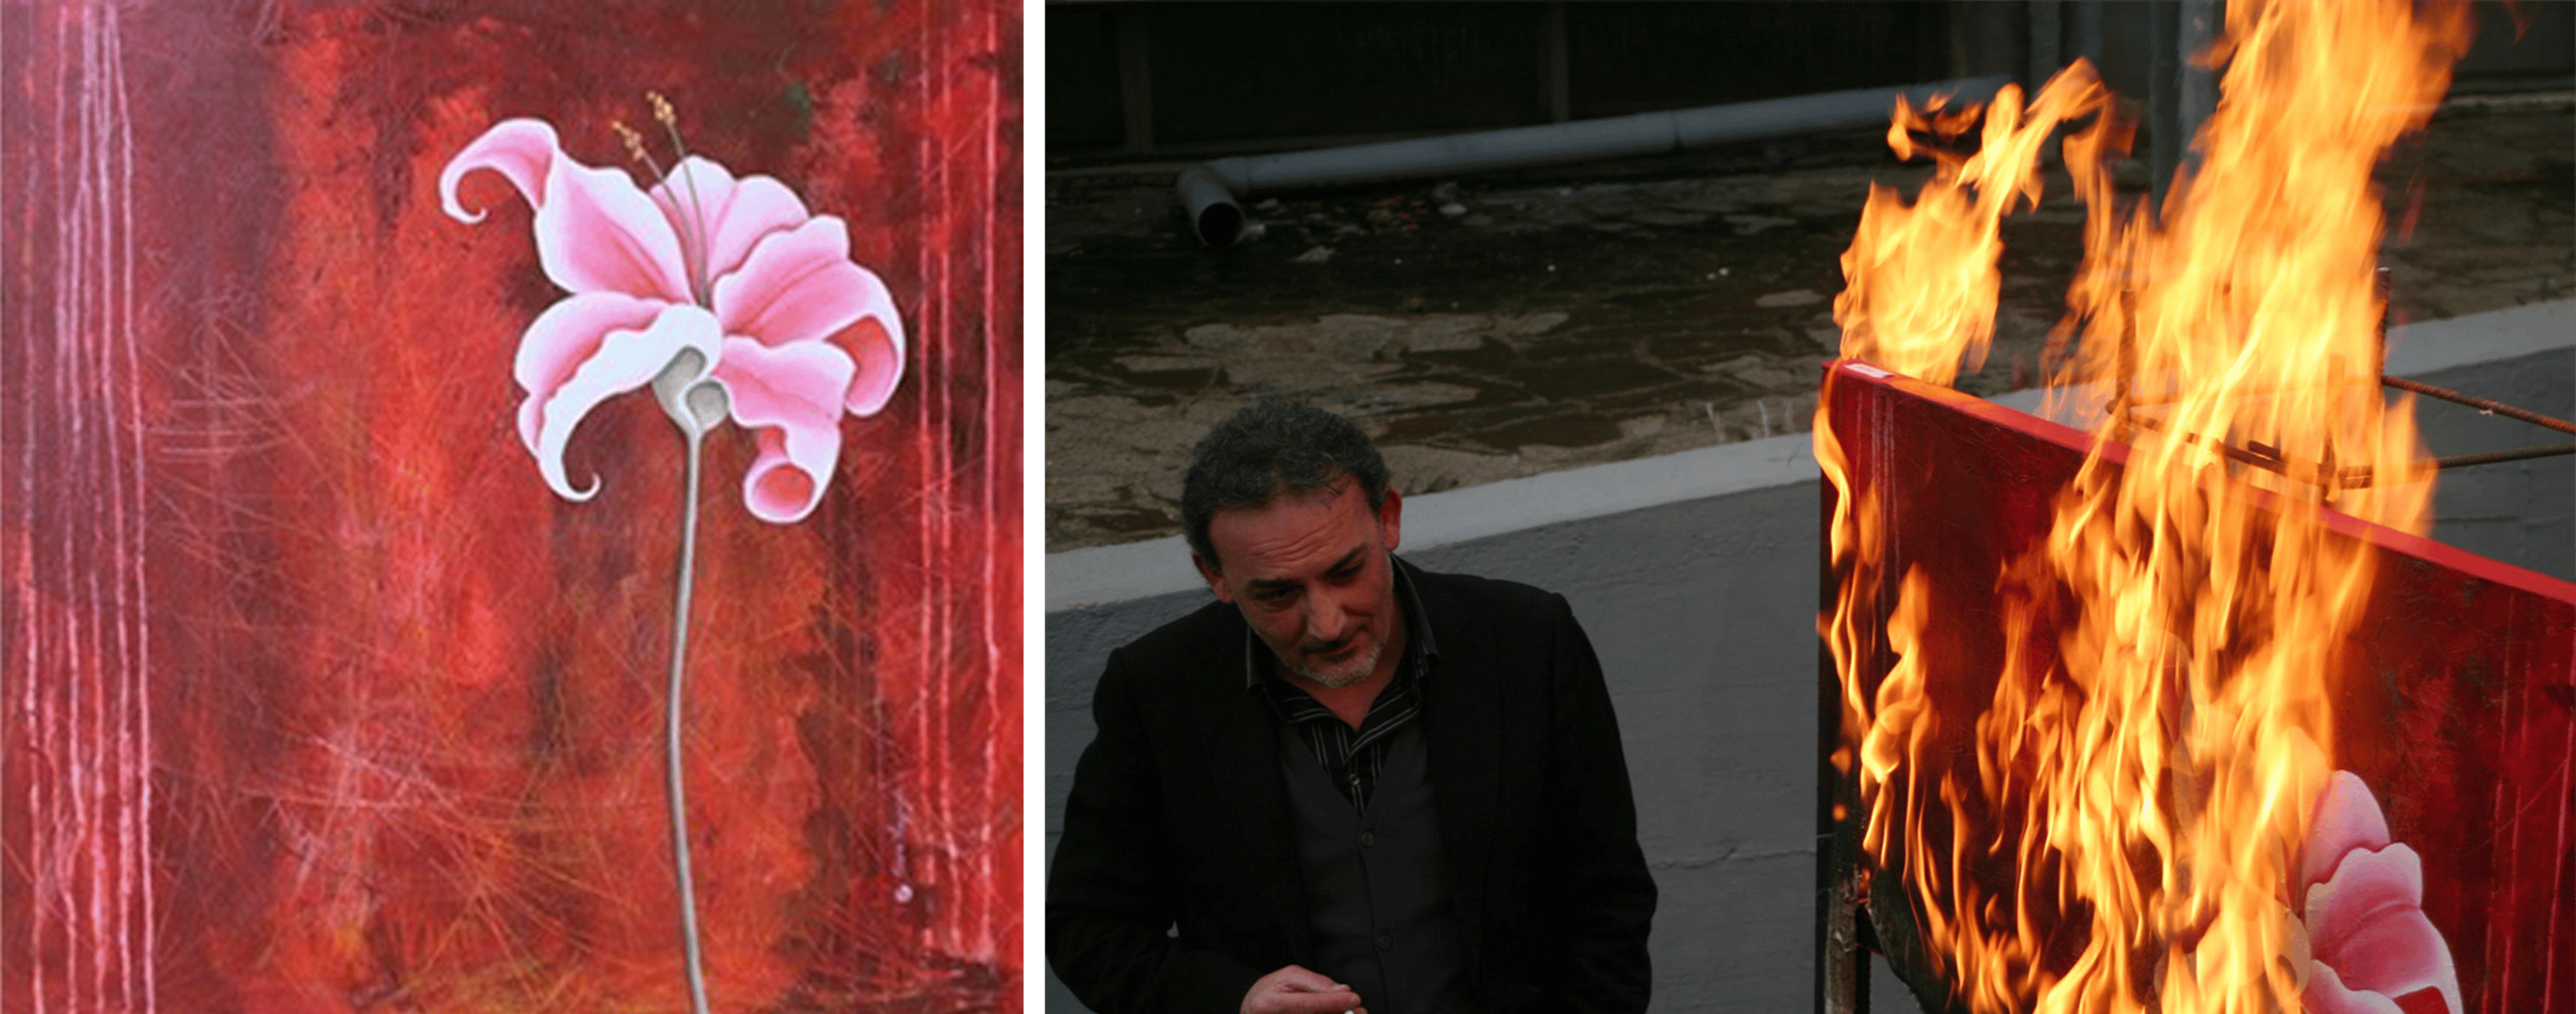 A pink flower on a red painting on the left. Standing next to the burning red picture on the right, Antonio Manfredi in a black suit is smoking a cigarette.